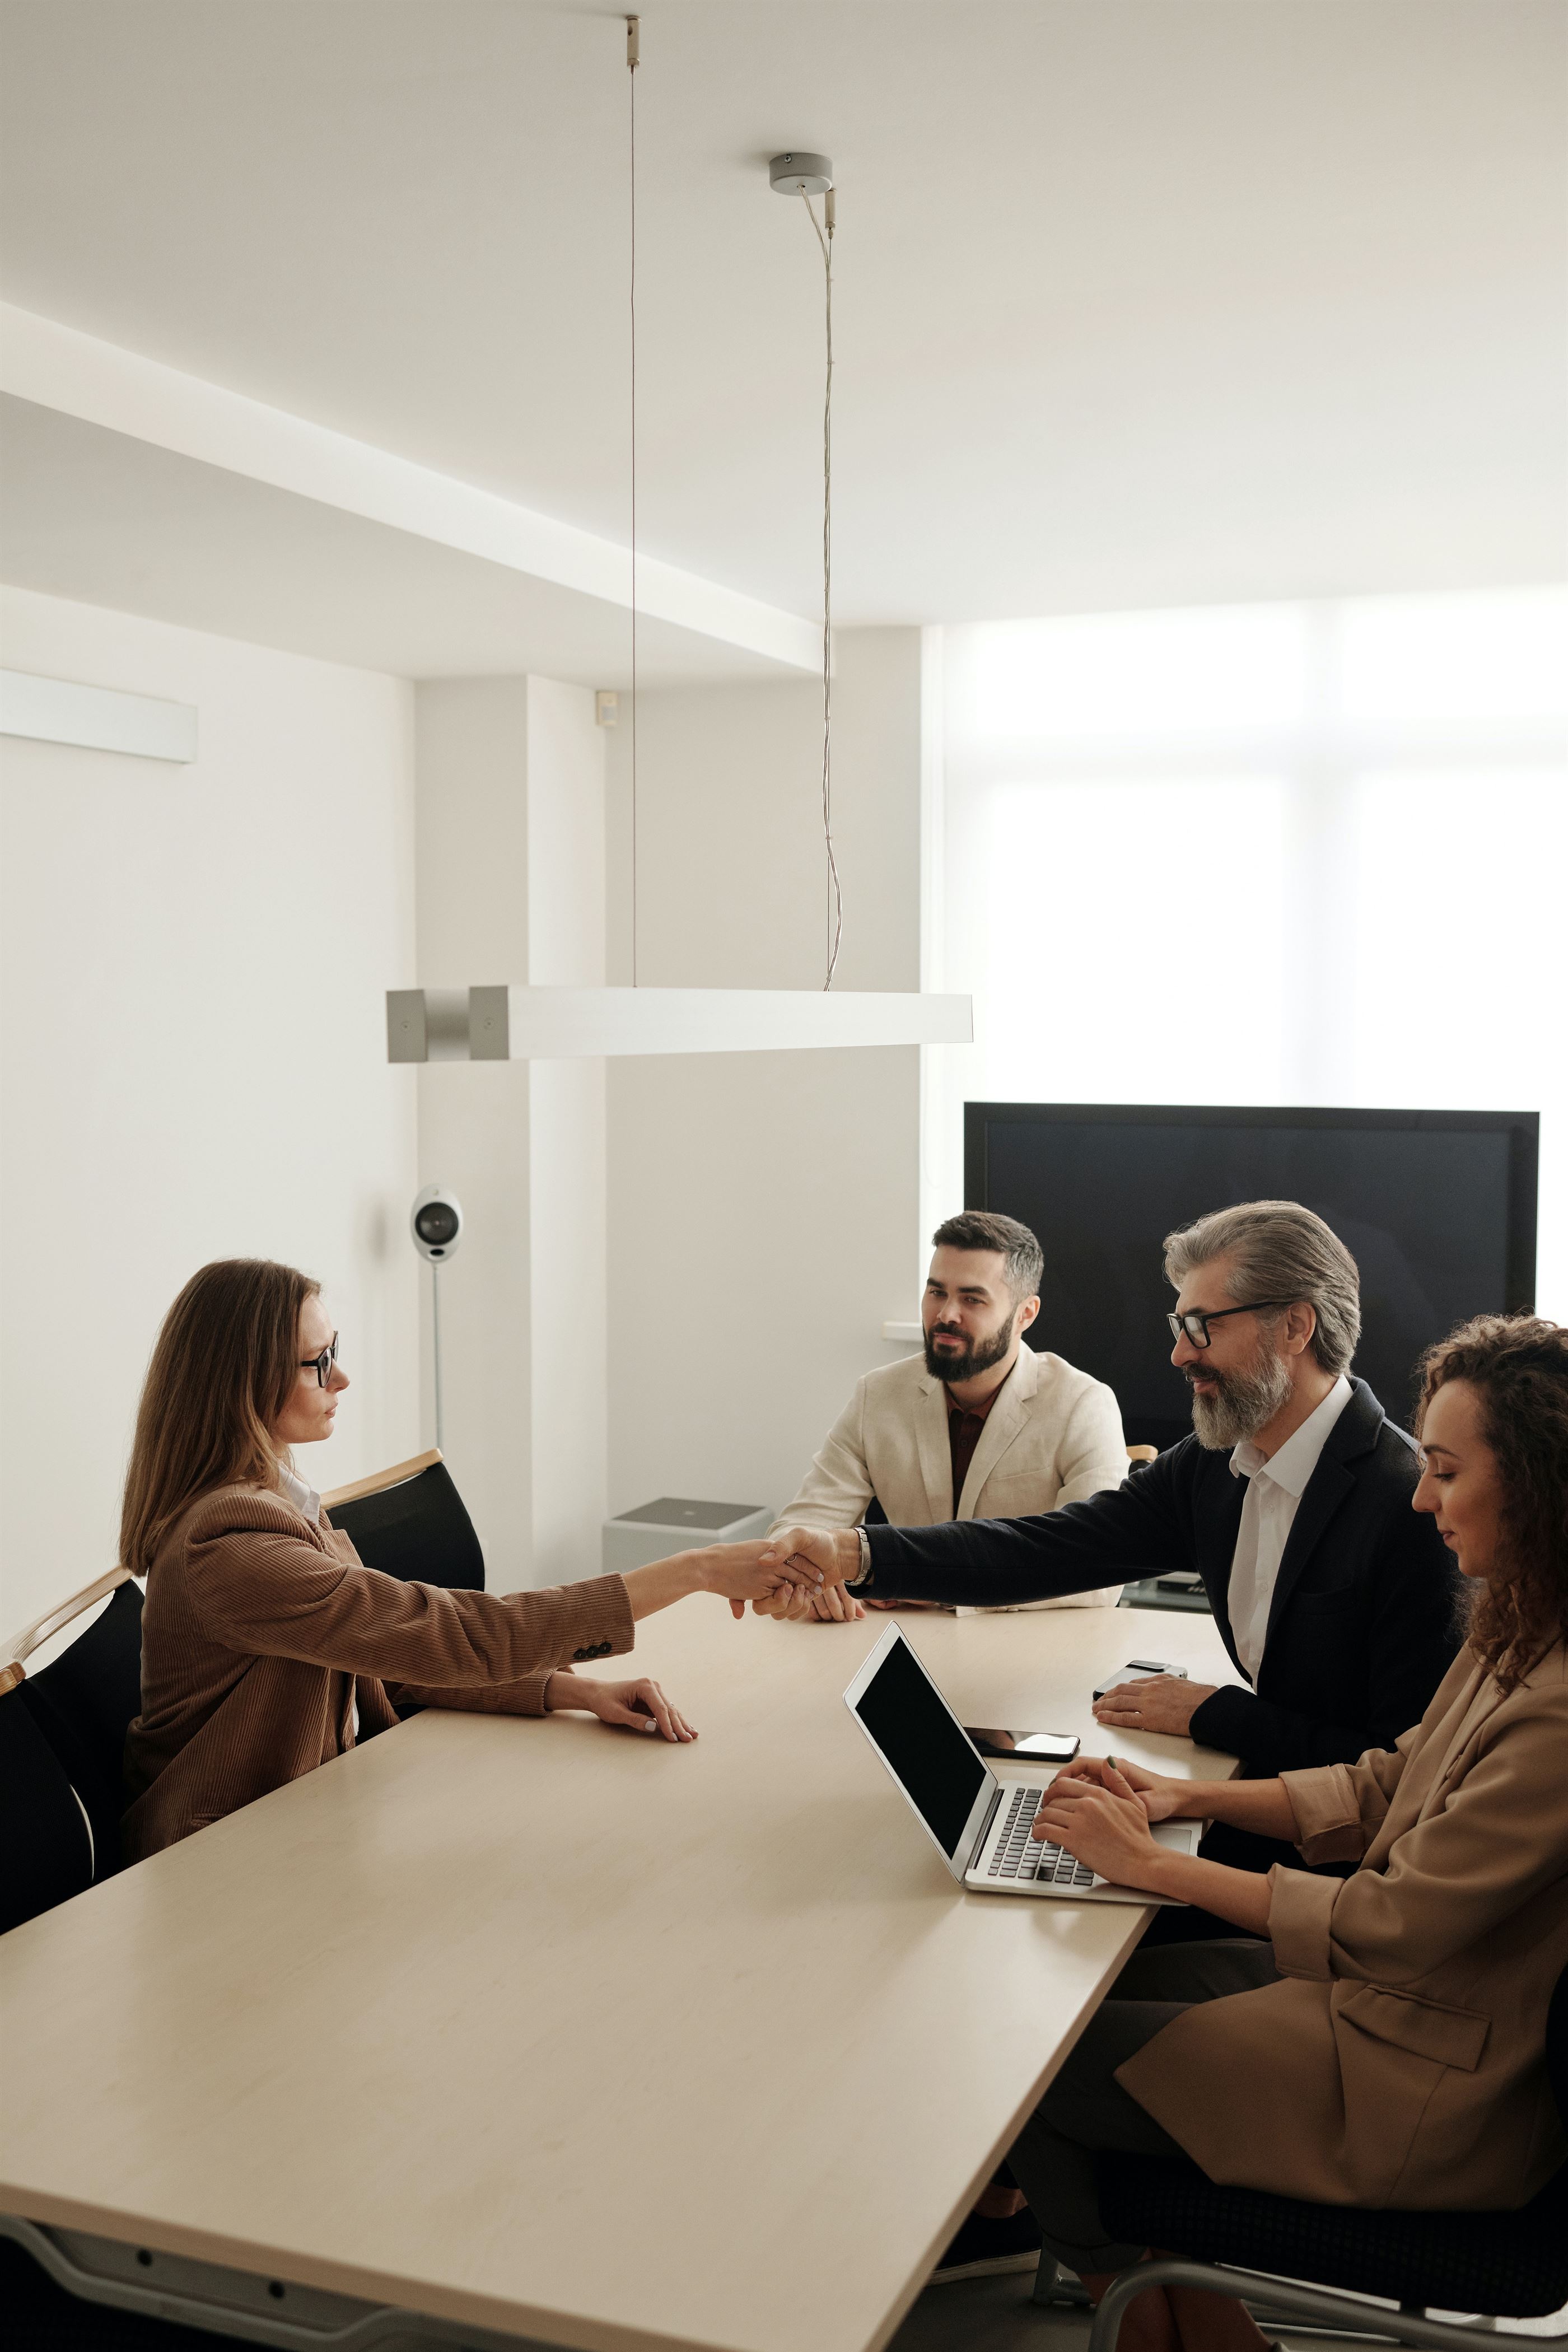 Accurate Title. Picture of an office with people shaking hands. Real estate title, 1031 exchange services in Mandeville, Covington, Madisonville, Hammond, Slidell. Title search, insurance, escrow services.